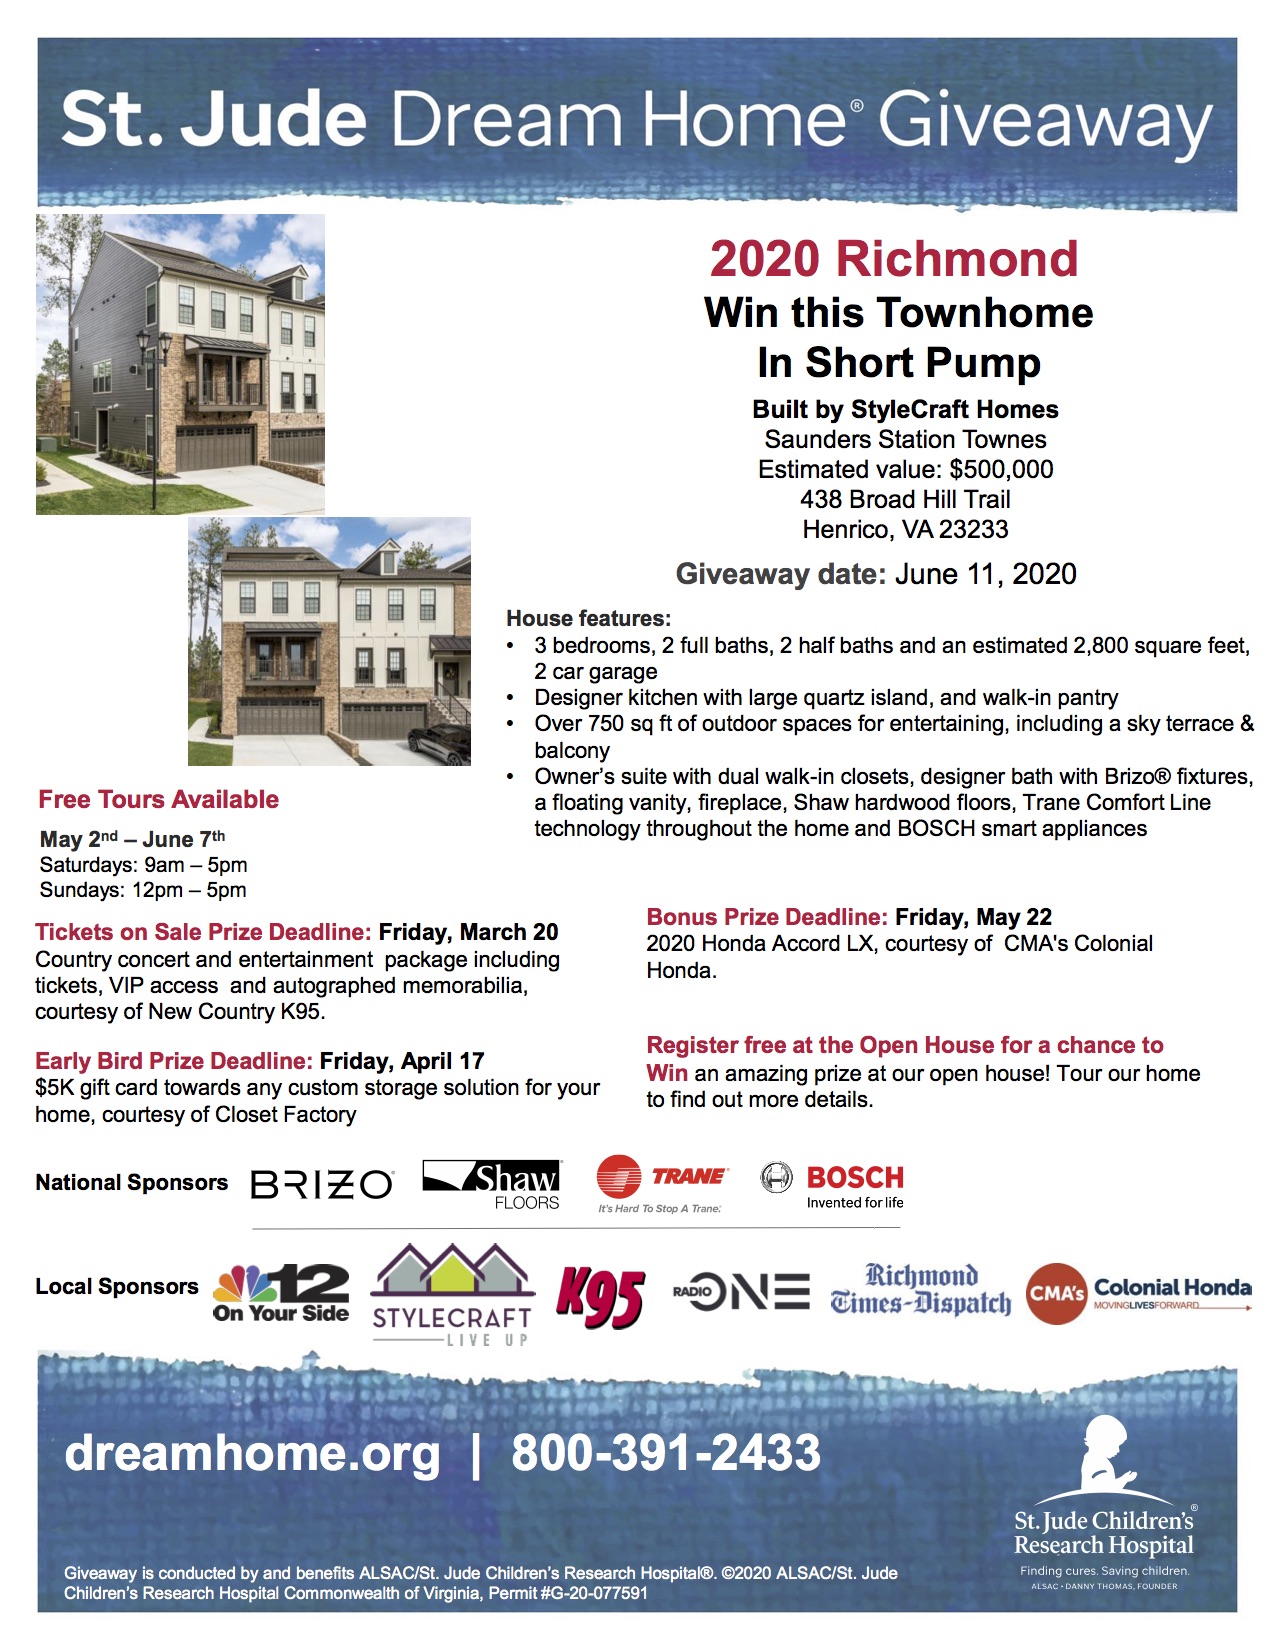 St. Jude Dream Home Giveaway! 99.3105.7 Kiss FM